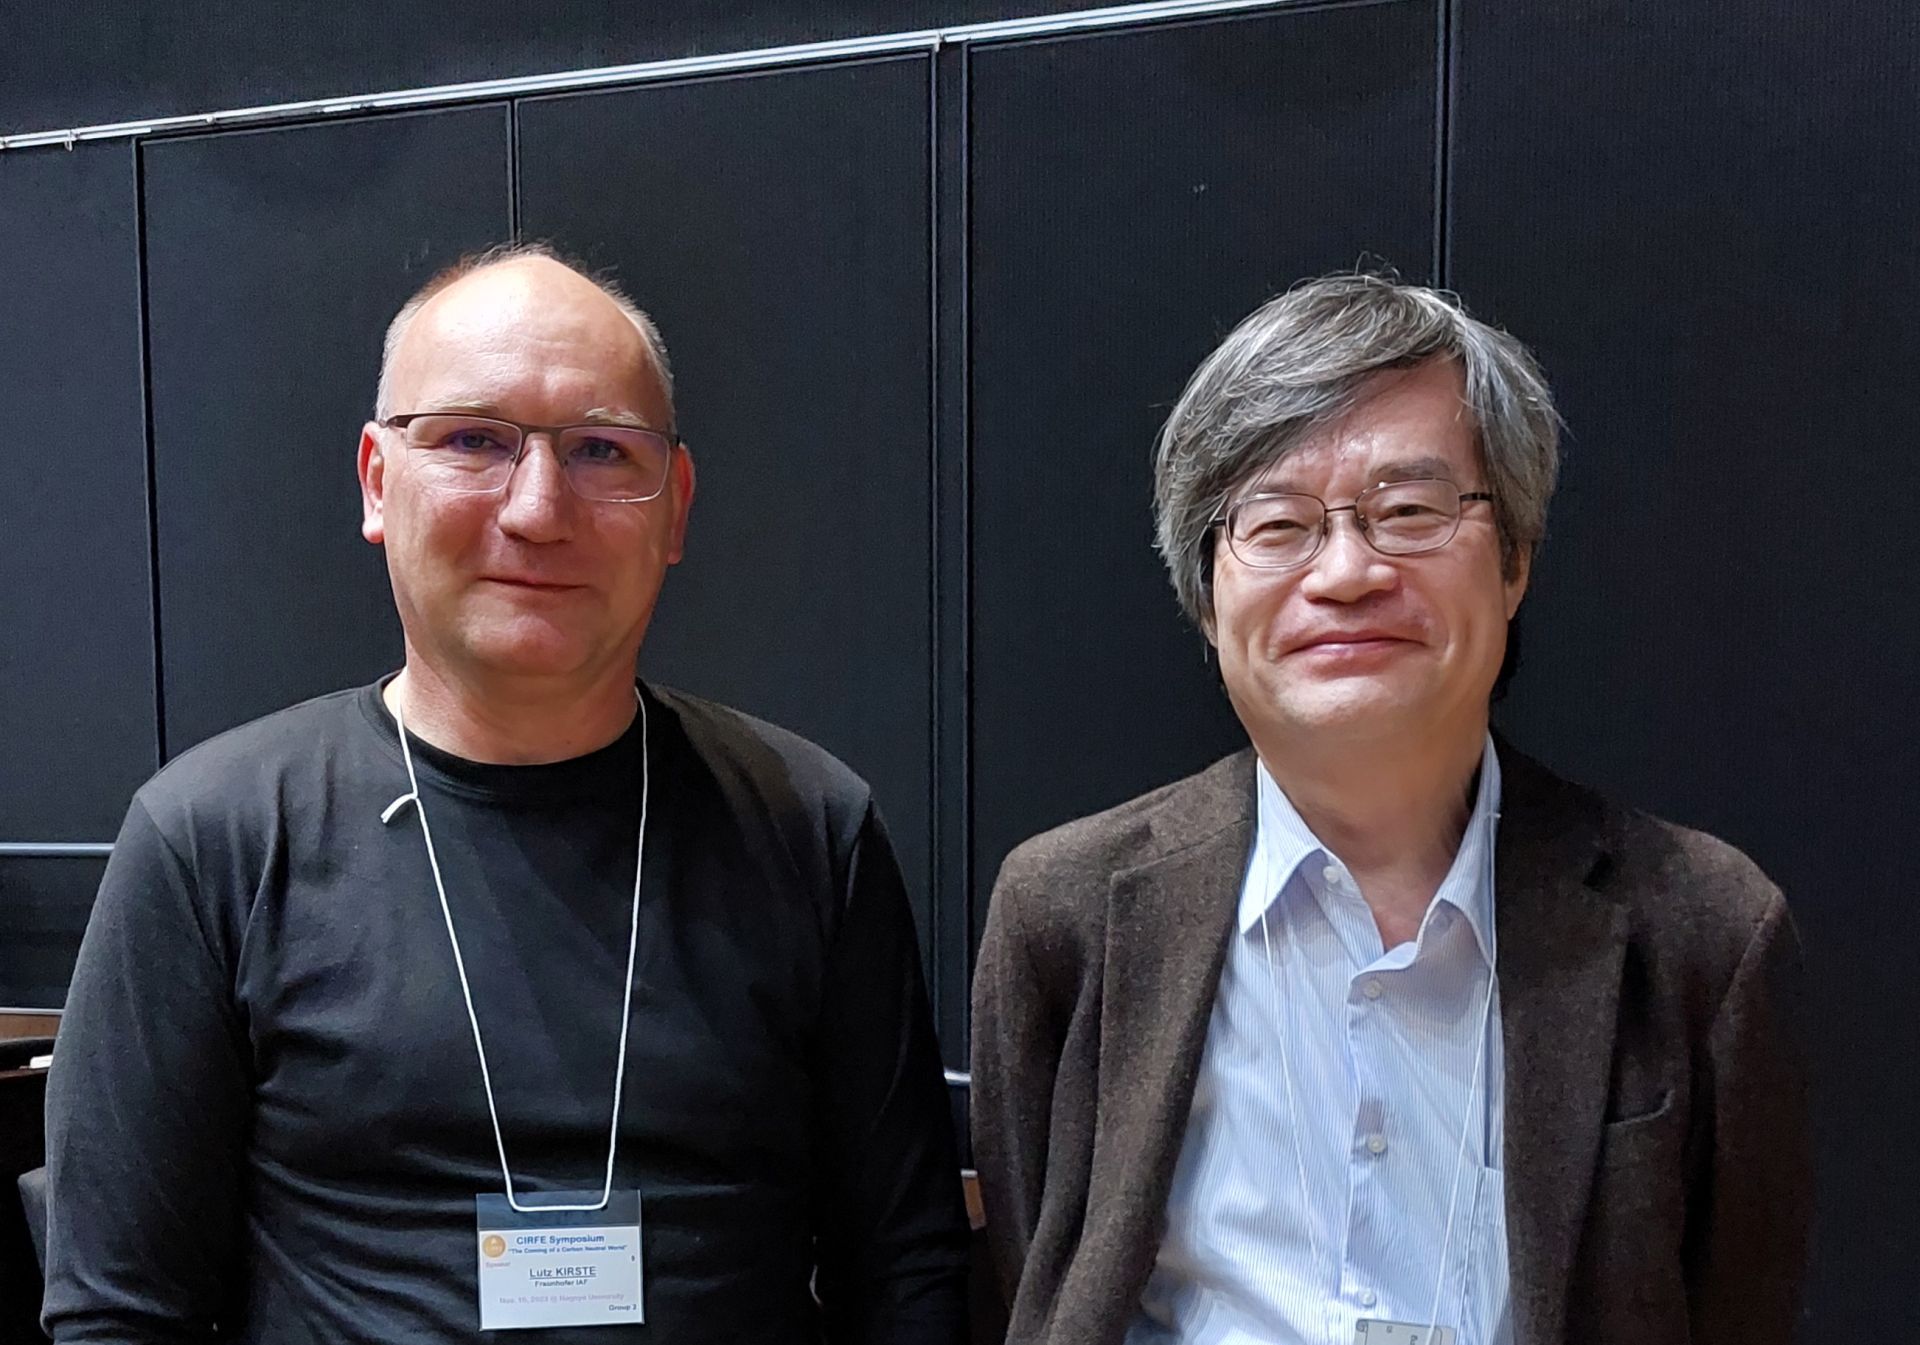 Dr. Lutz Kirste (l.), Head of Structural Analysis at Fraunhofer IAF, with Prof. Dr. Hiroshi Amano (r.) at Nagoya University